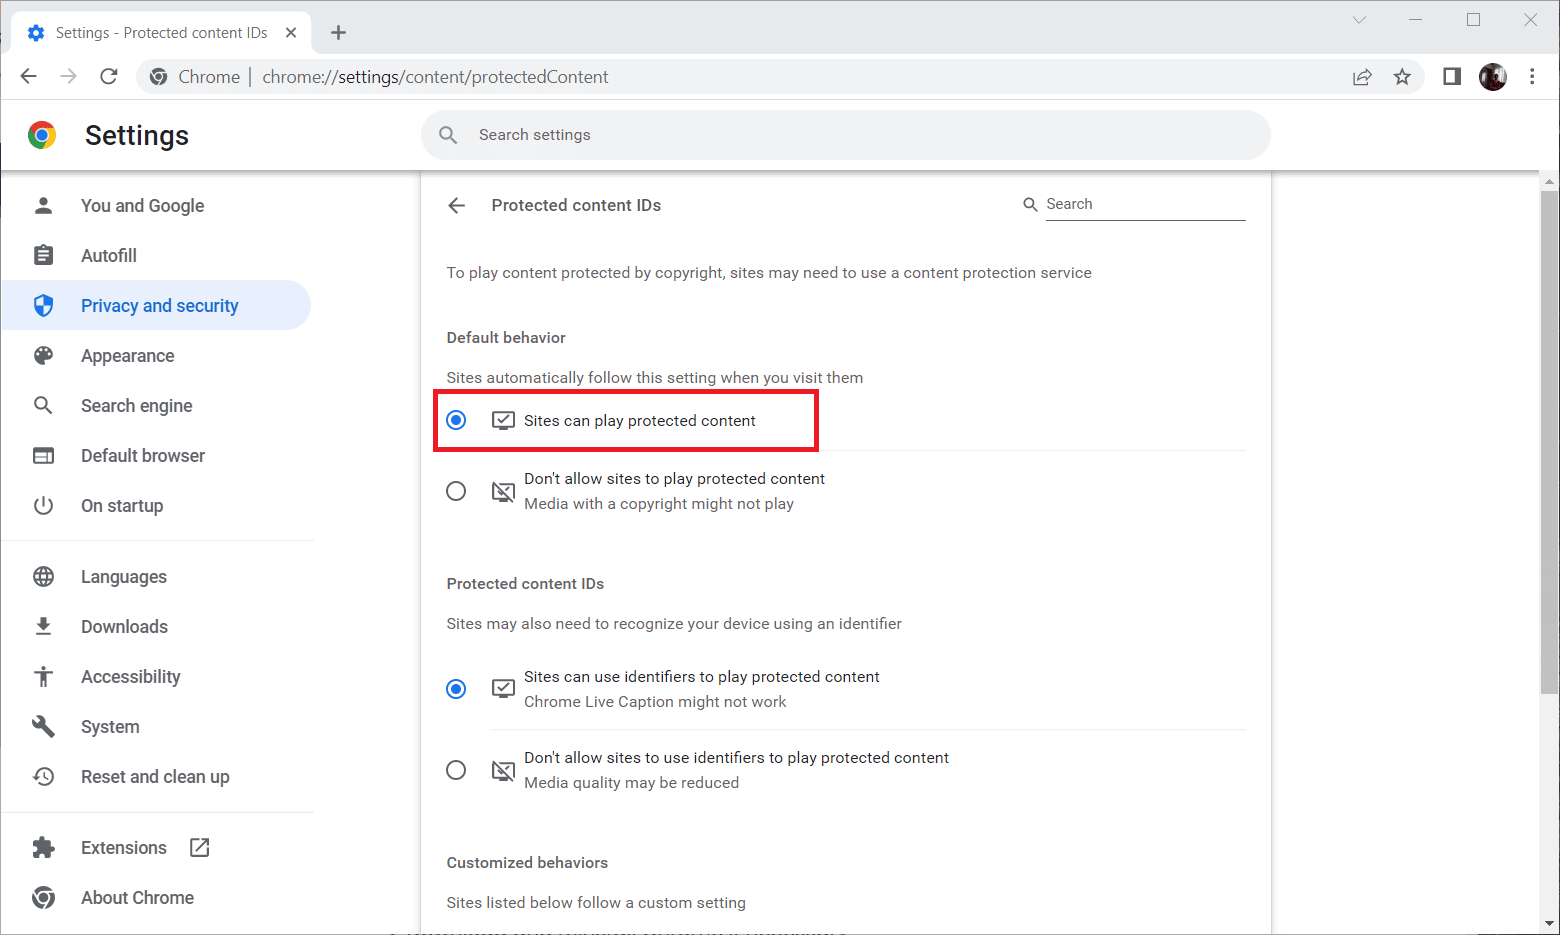 Enable Sites can play protected content option in Sites automatically follow this setting when you visit them under Default behavior section